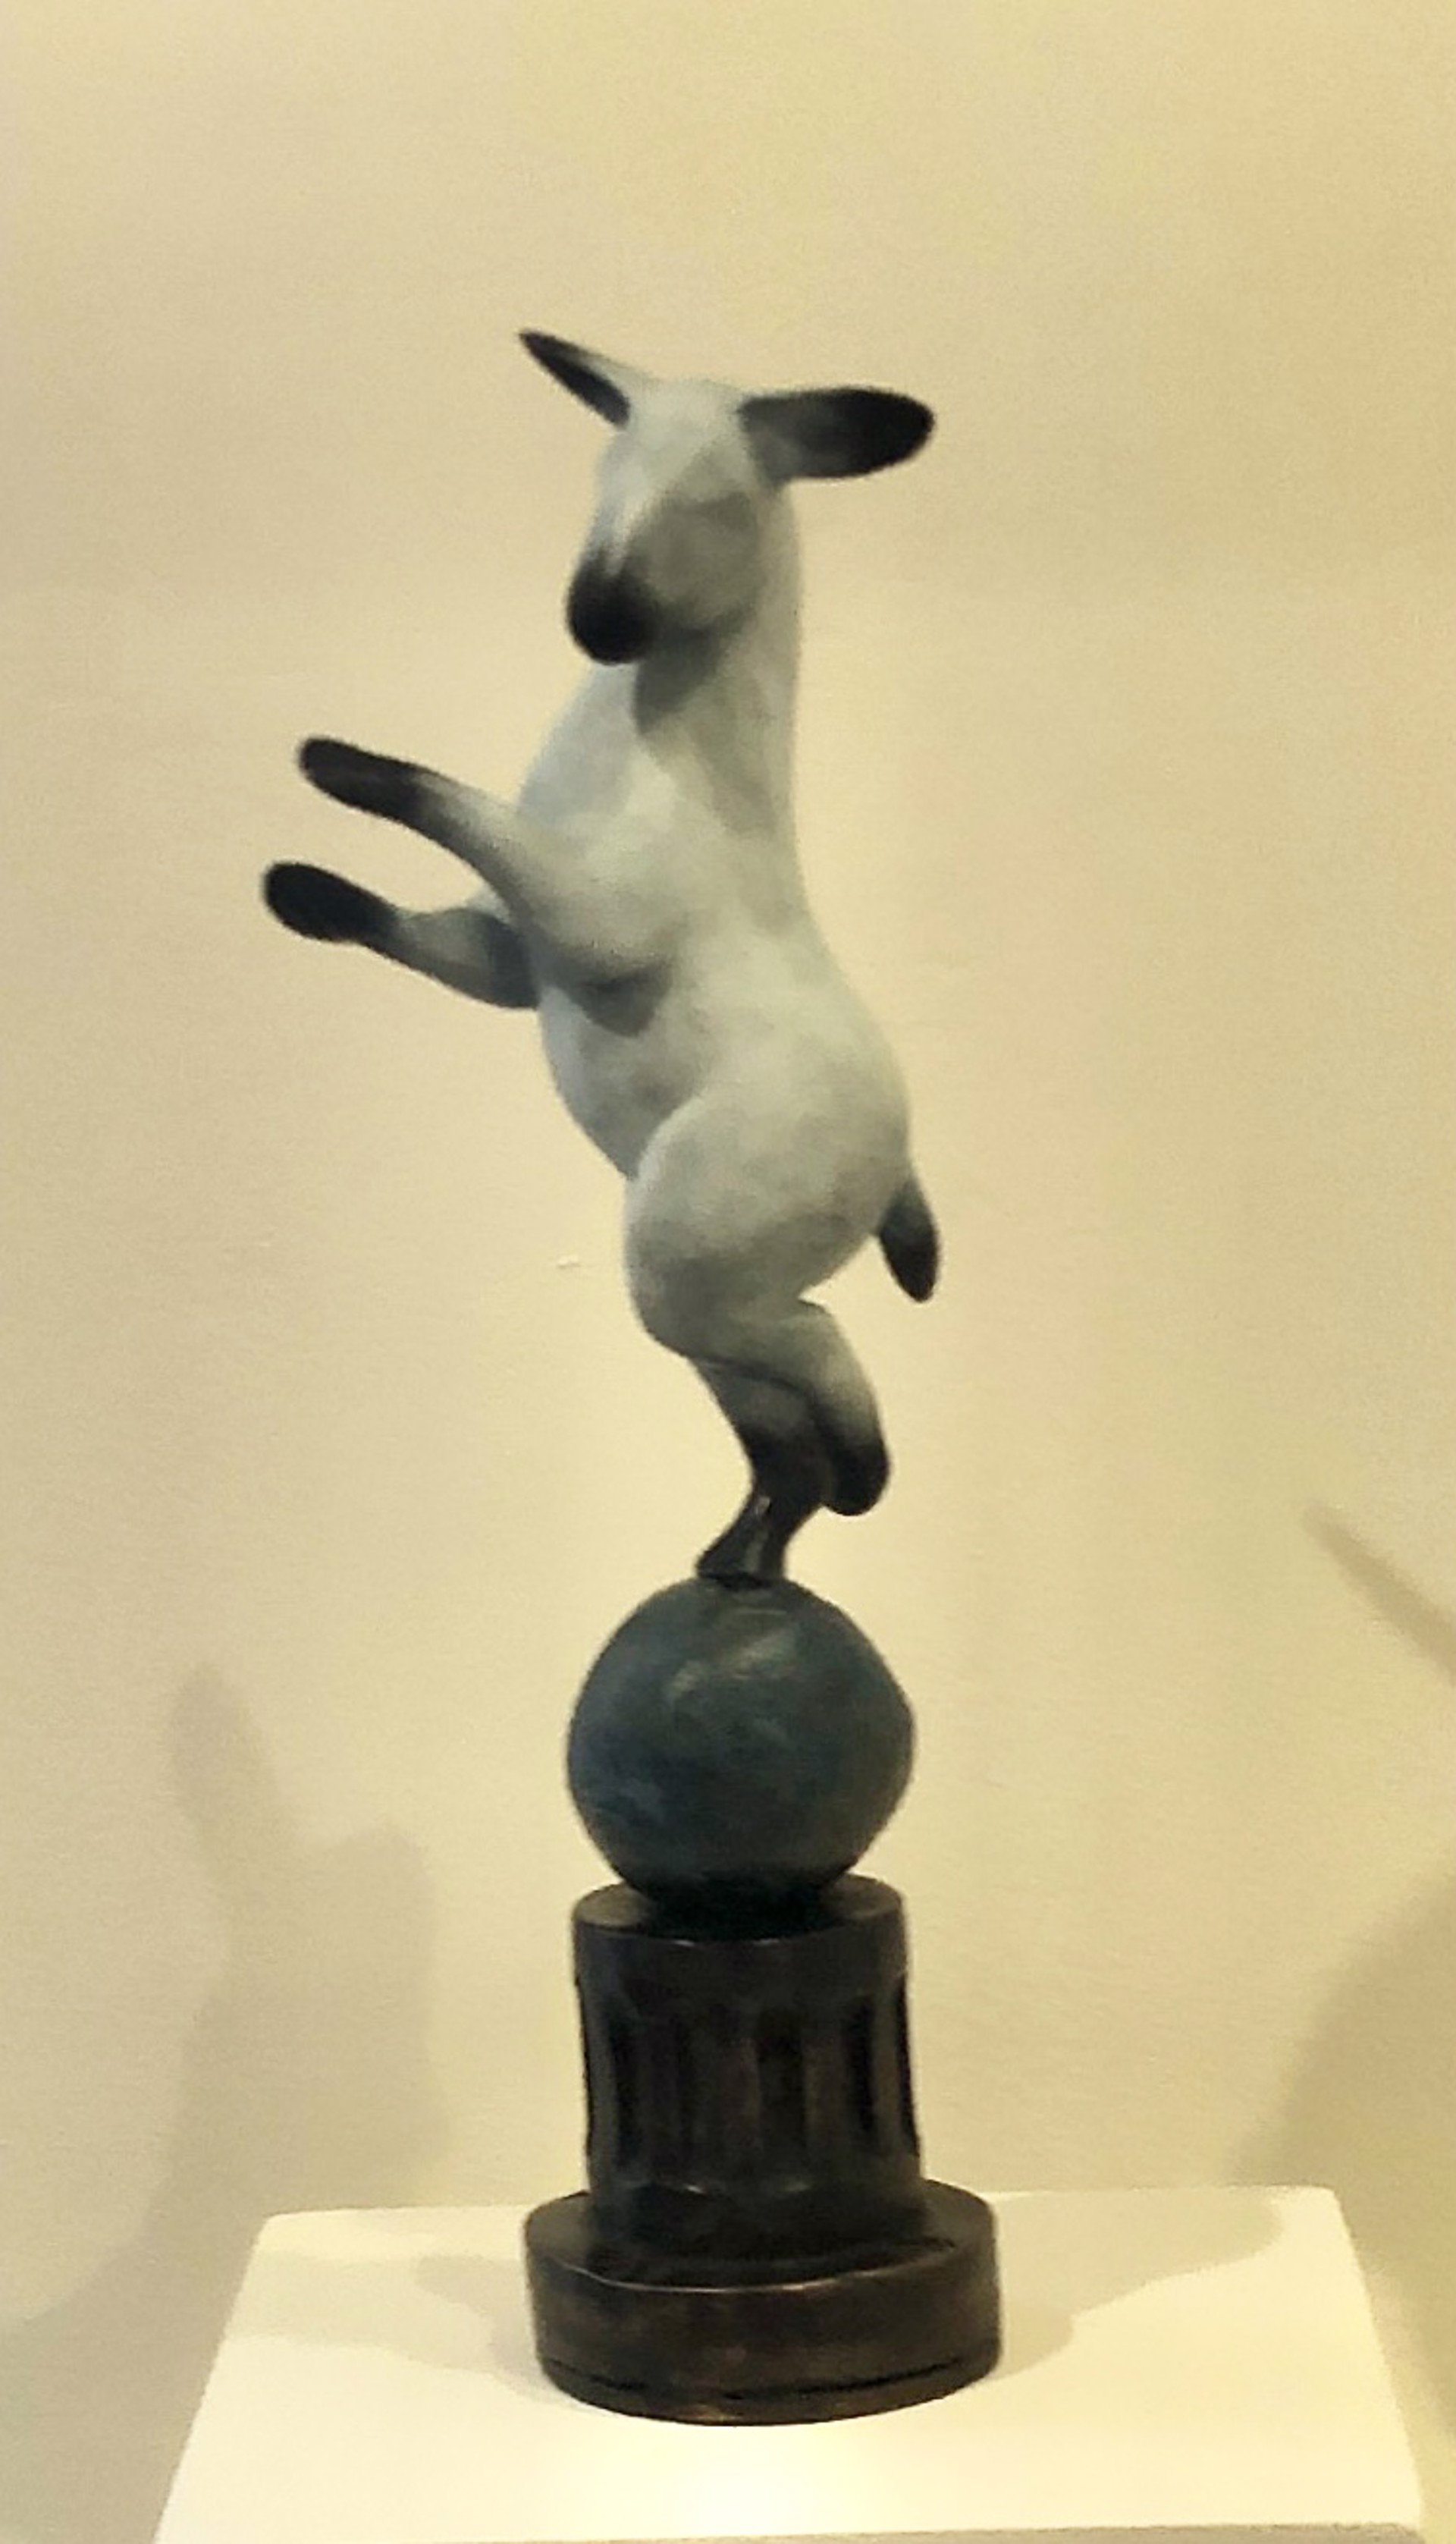 Burro on a Ball by Copper Tritscheller